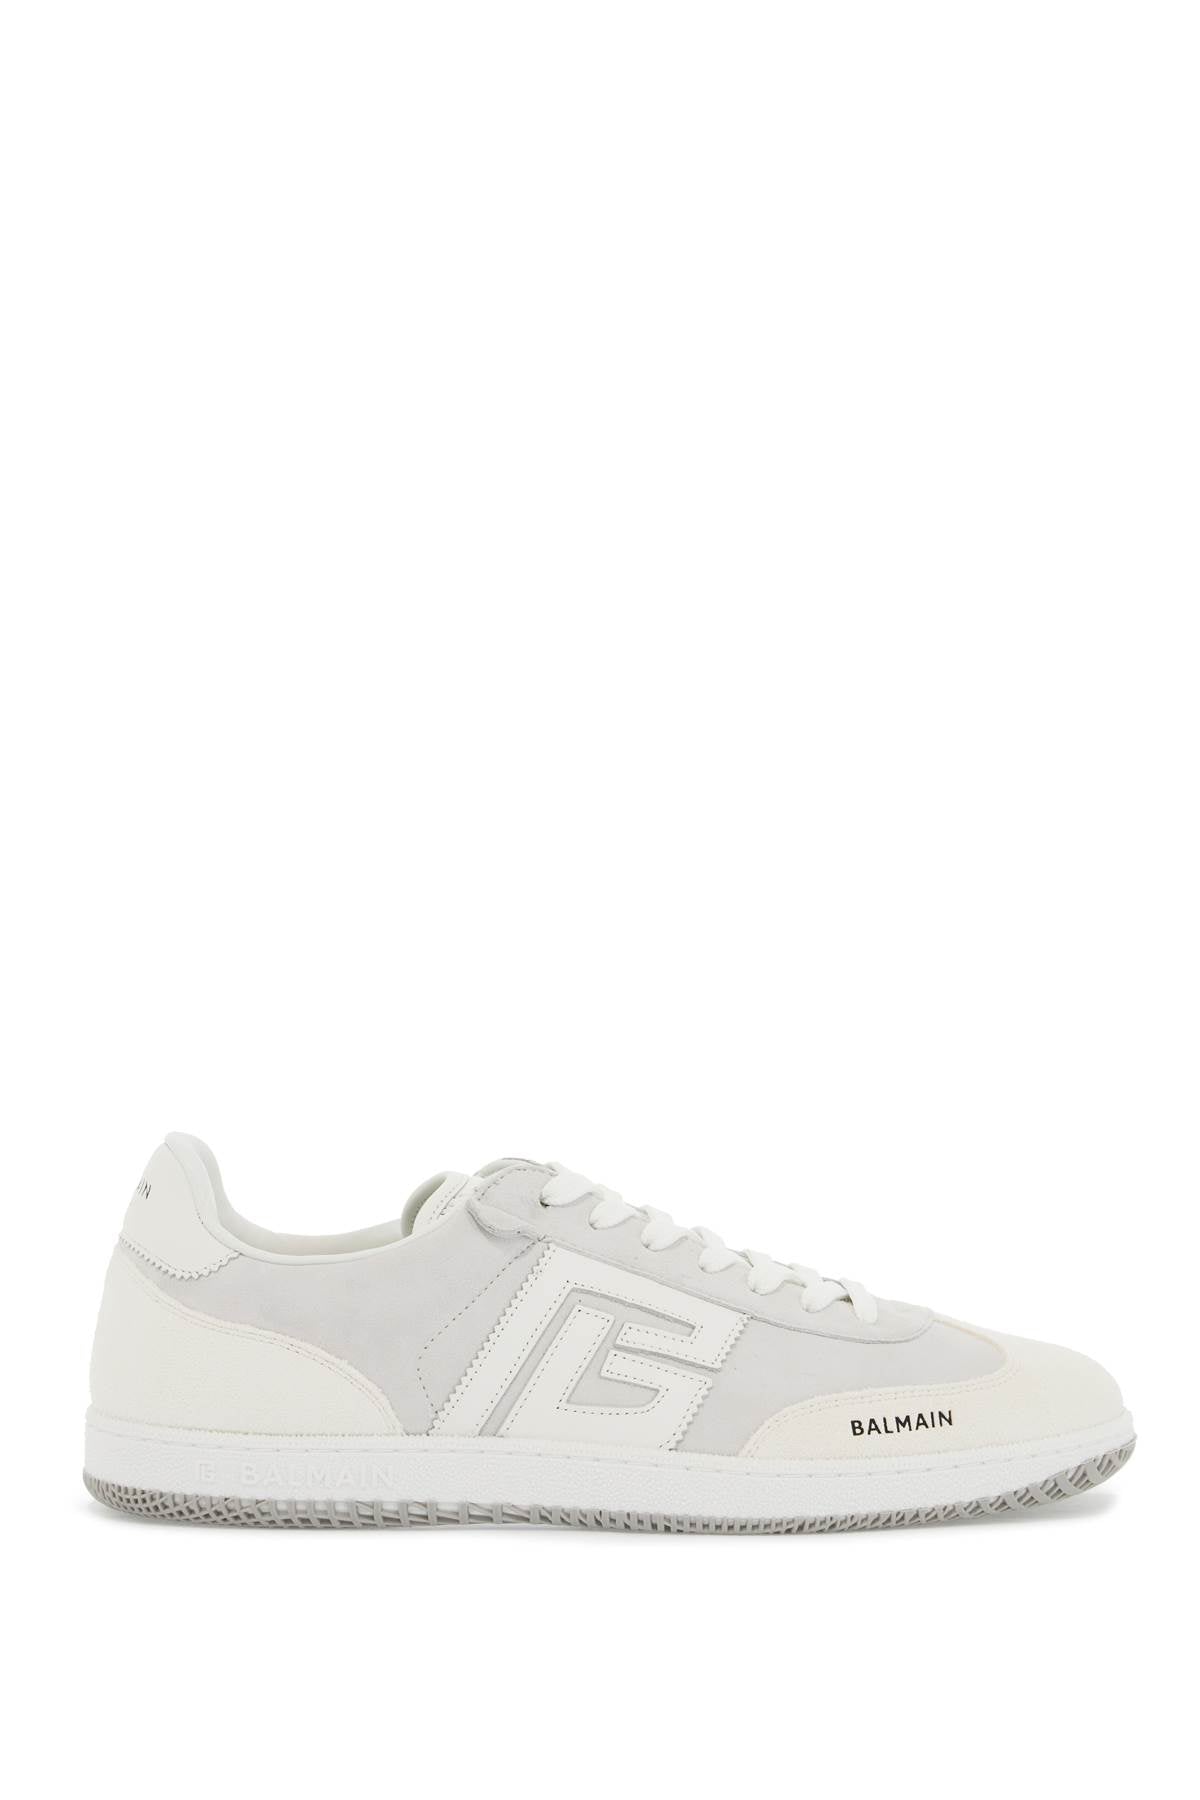 Balmain Leather Swan Sneakers For   White